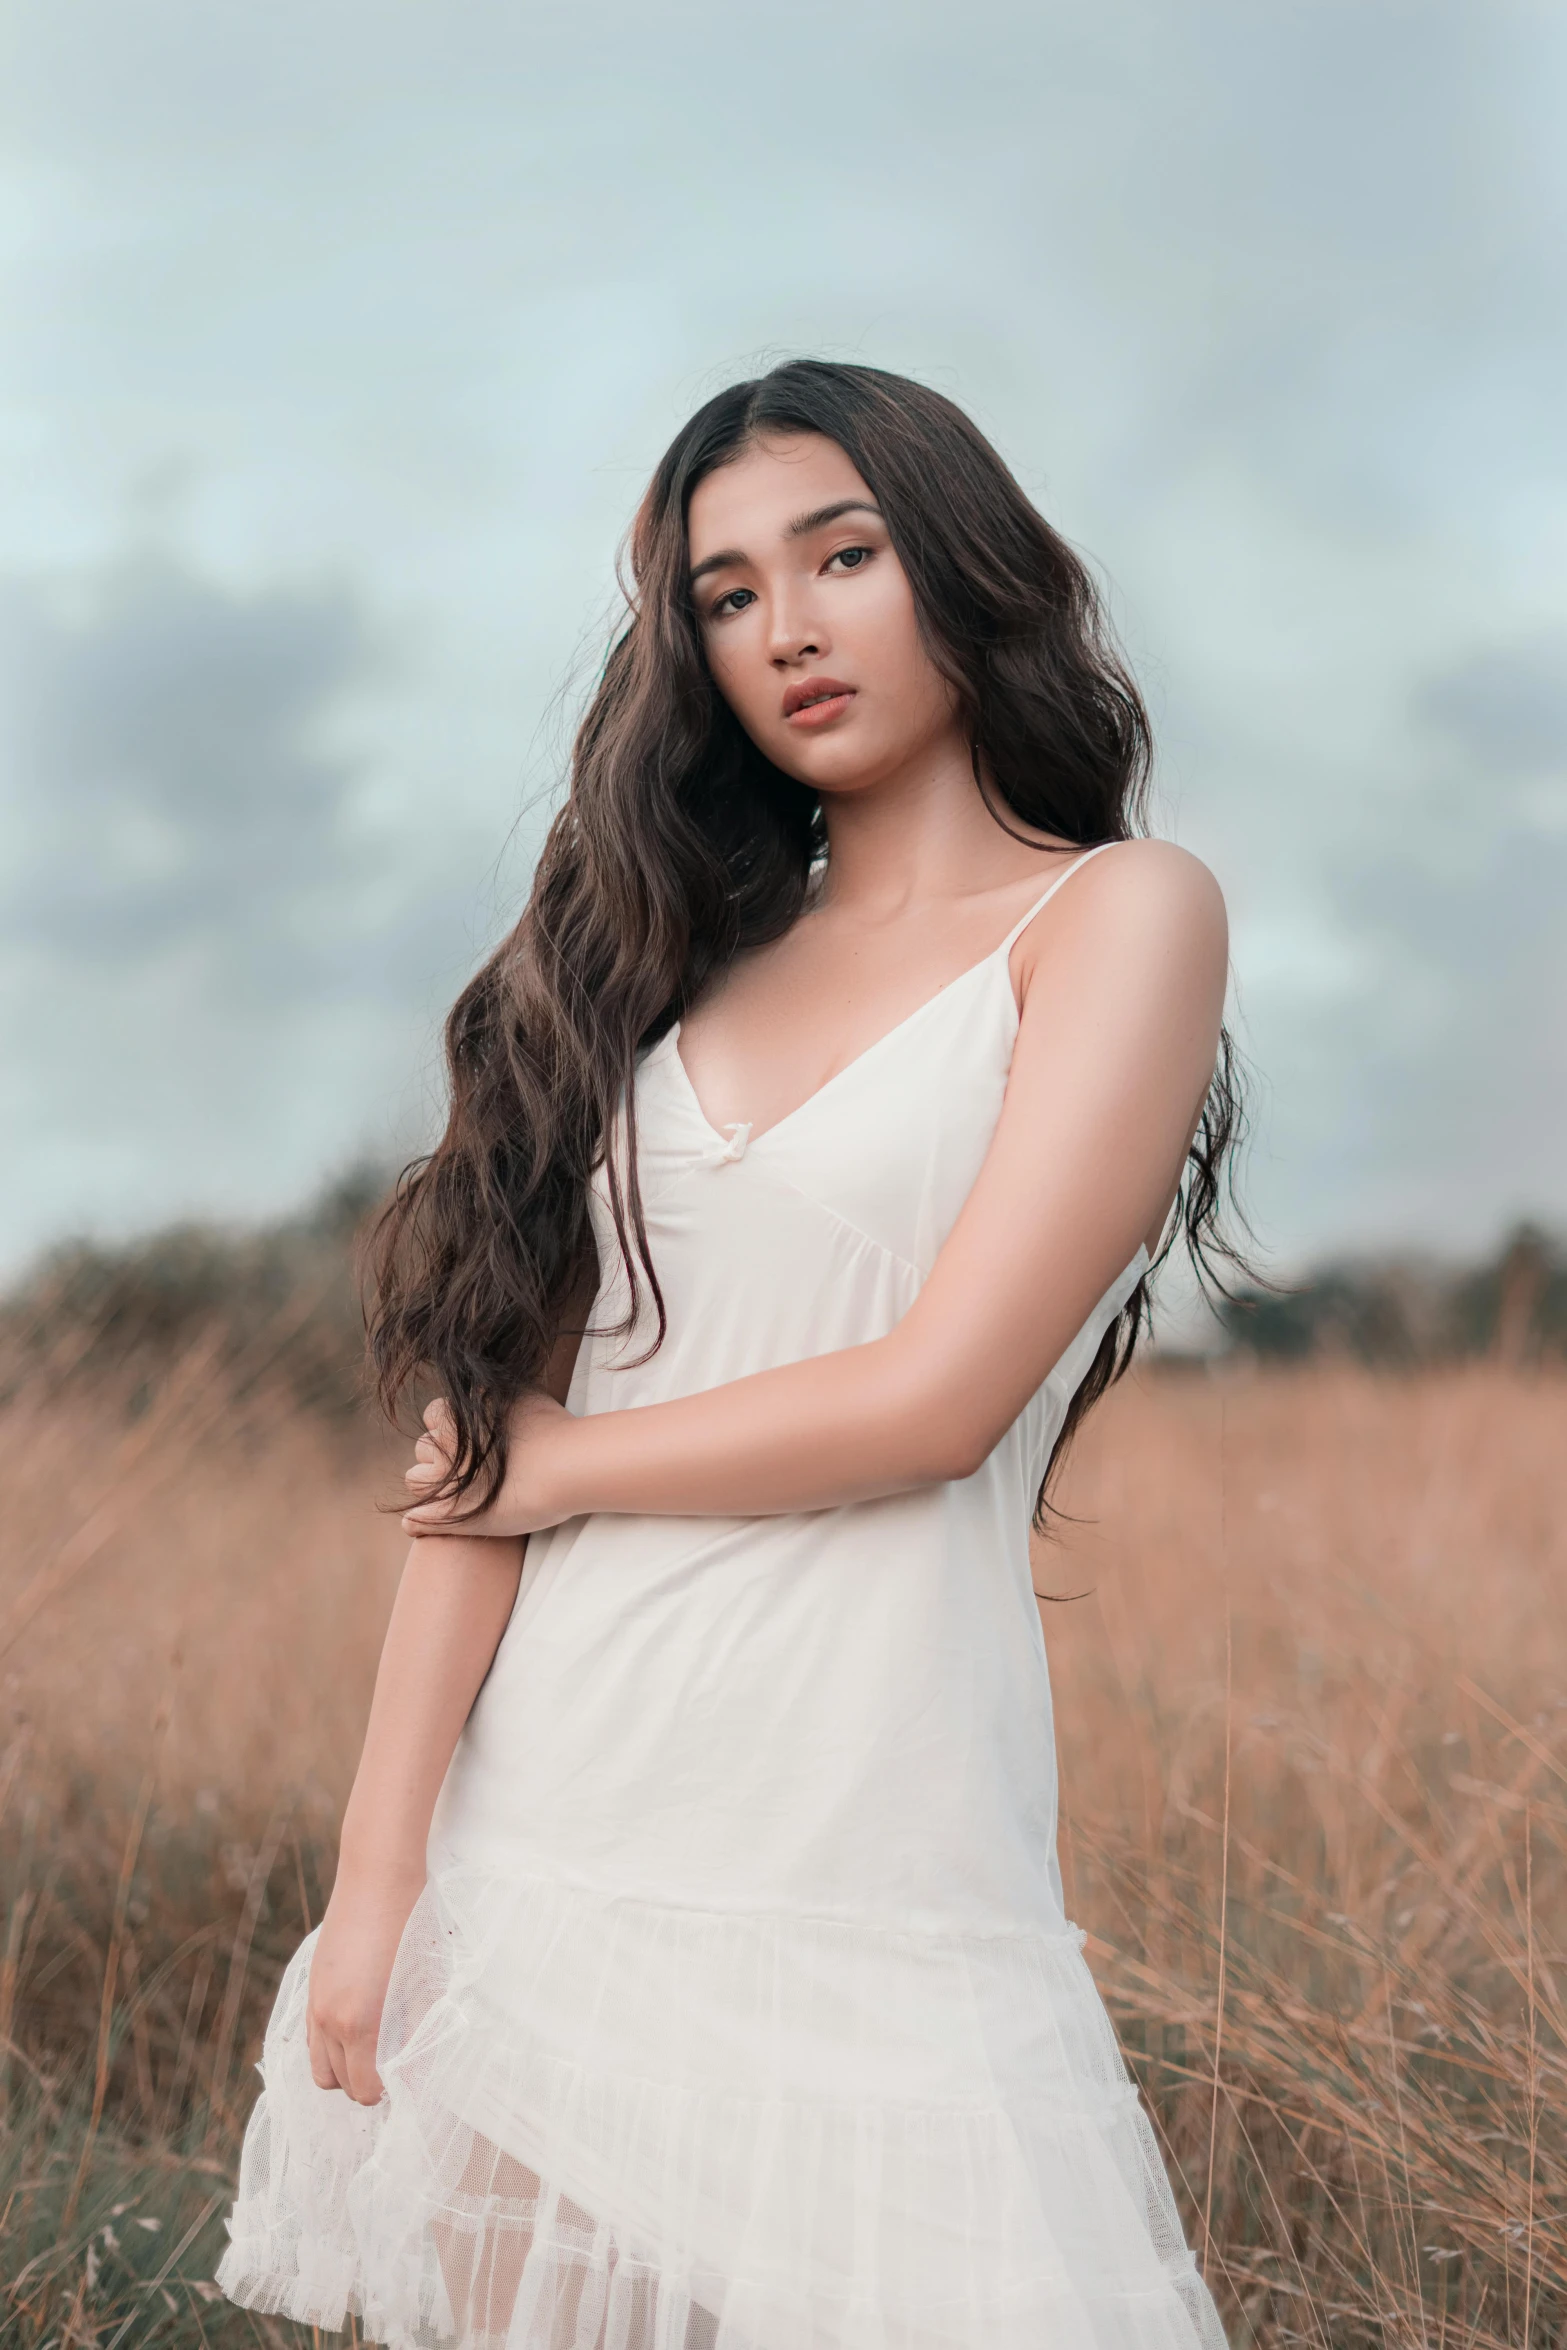 a woman in a white dress standing in a field, by Robbie Trevino, trending on pexels, asian girl with long hair, promo image, wearing a camisole, high quality image